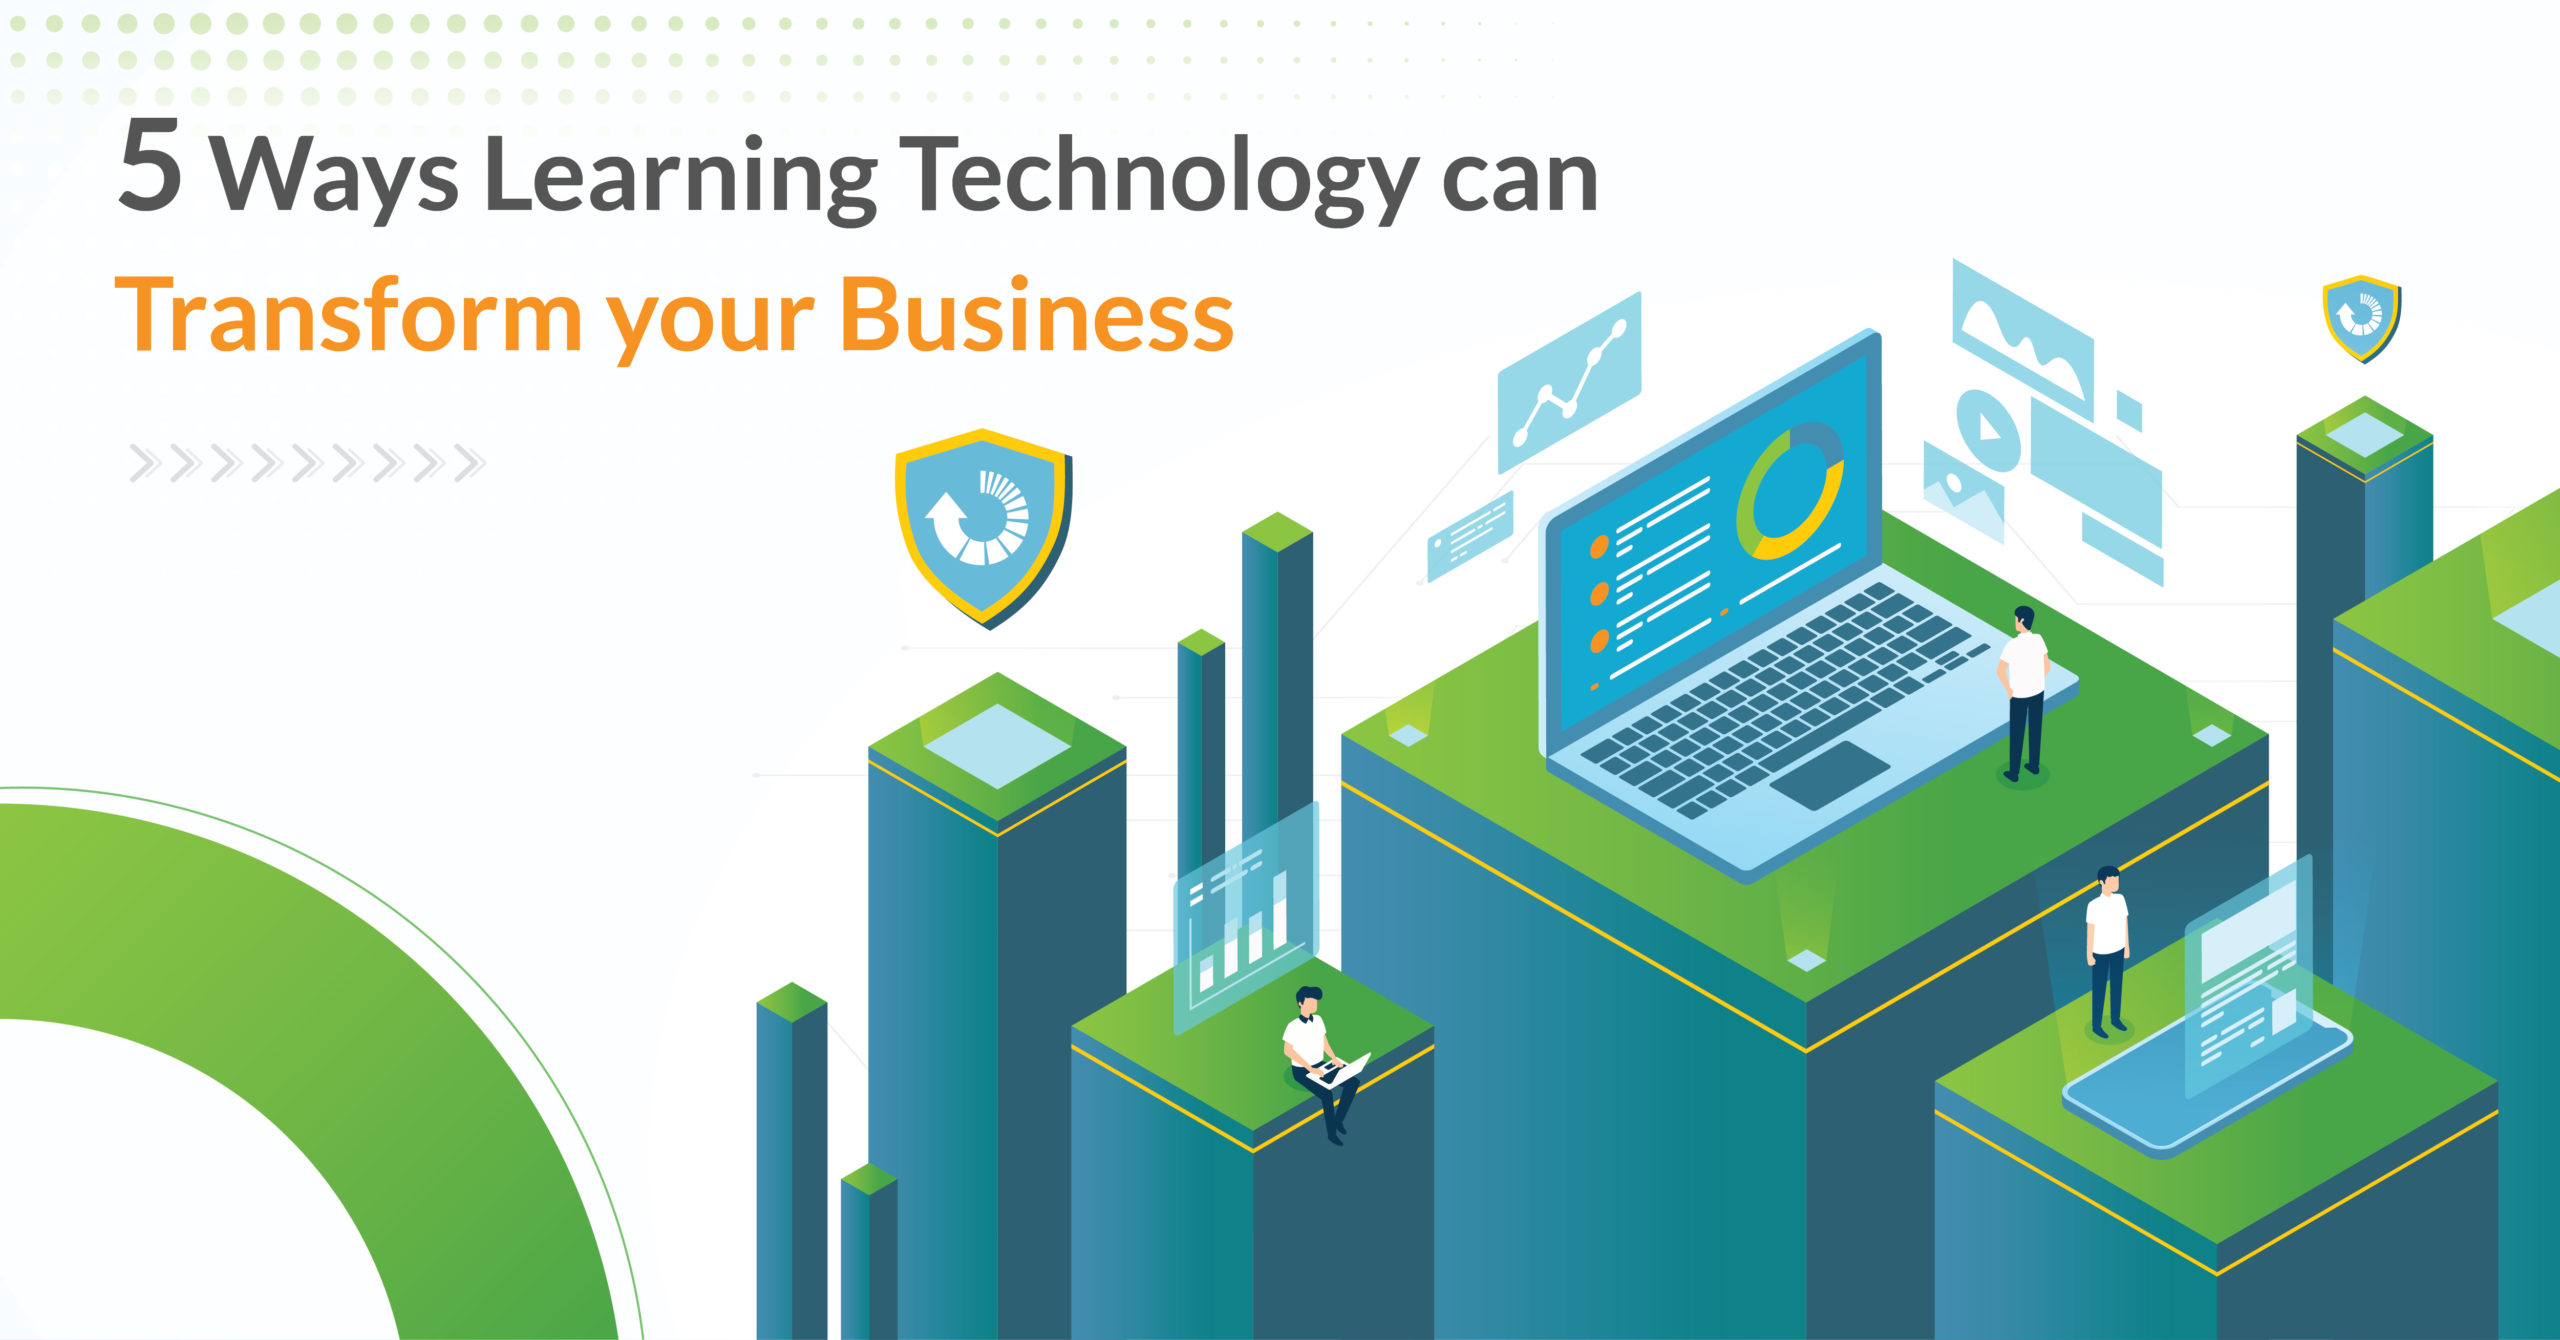 5 Ways Learning Technology can Transform your Business